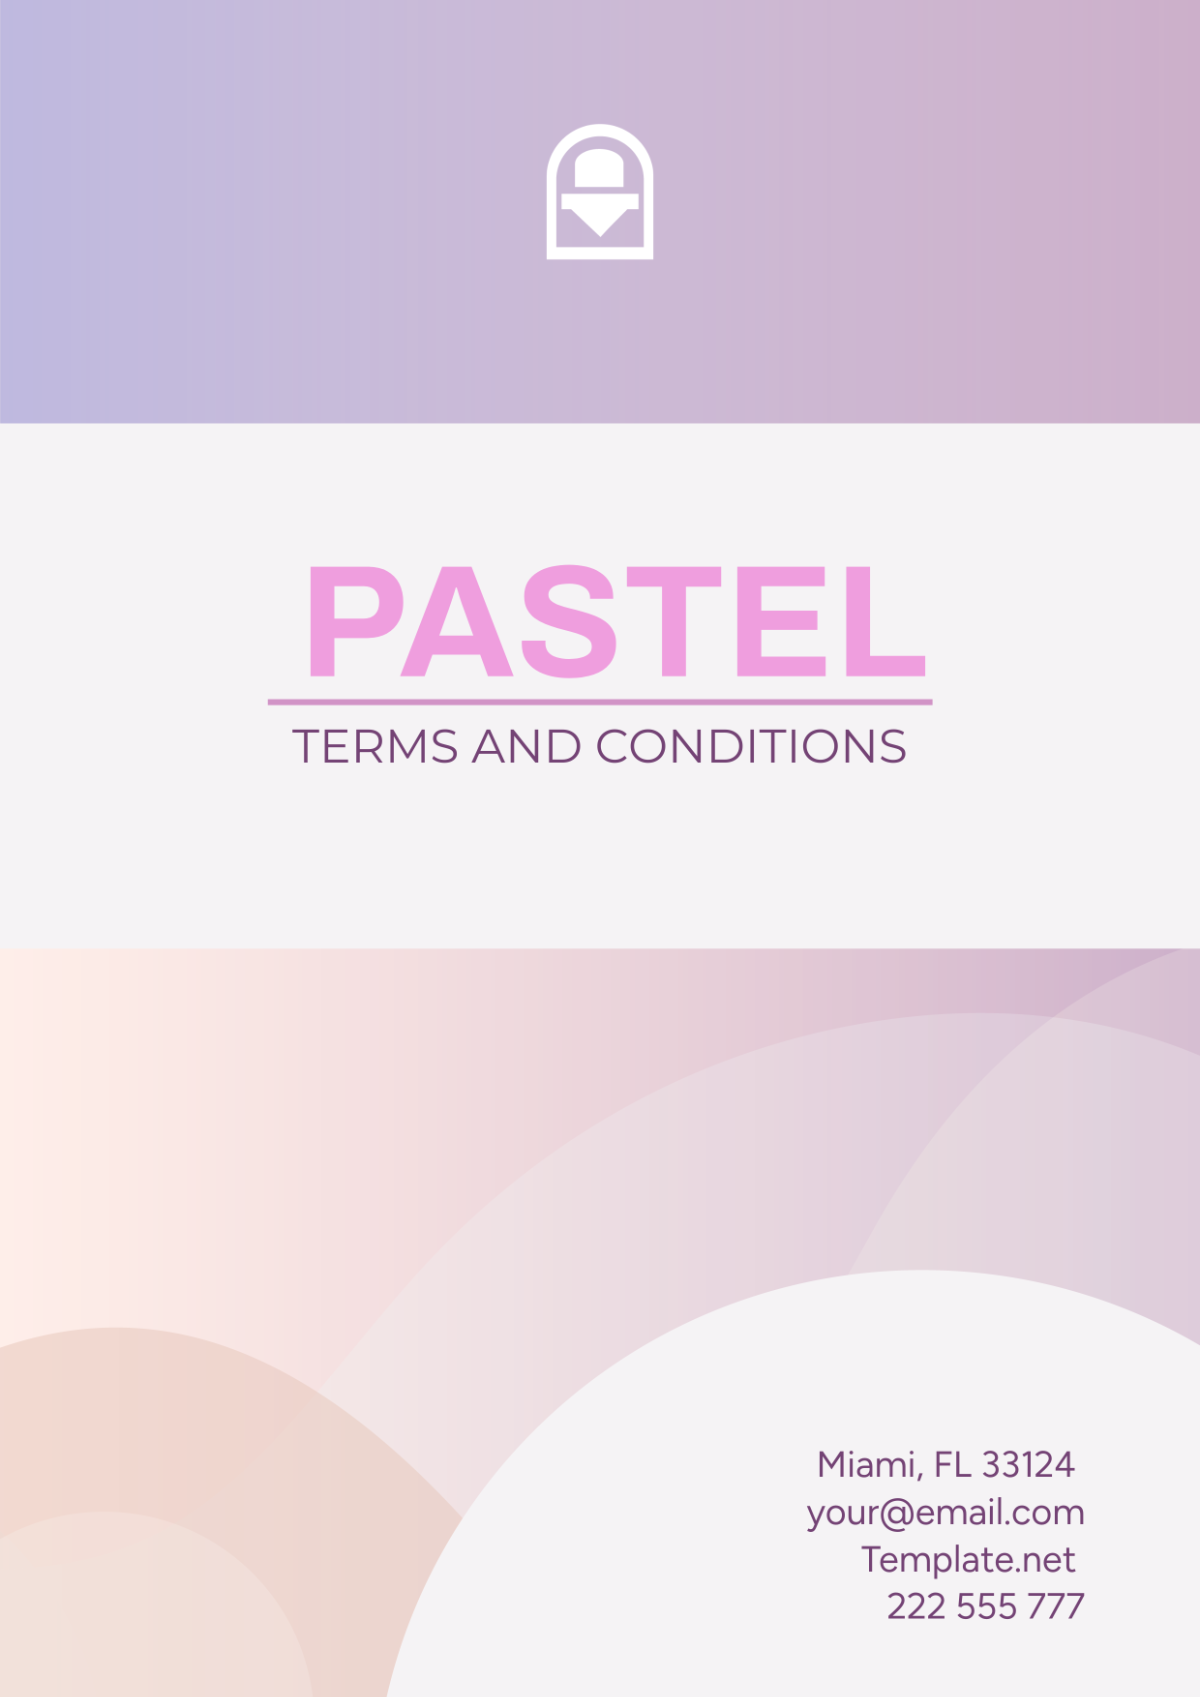 Pastel Terms and Conditions Cover Page